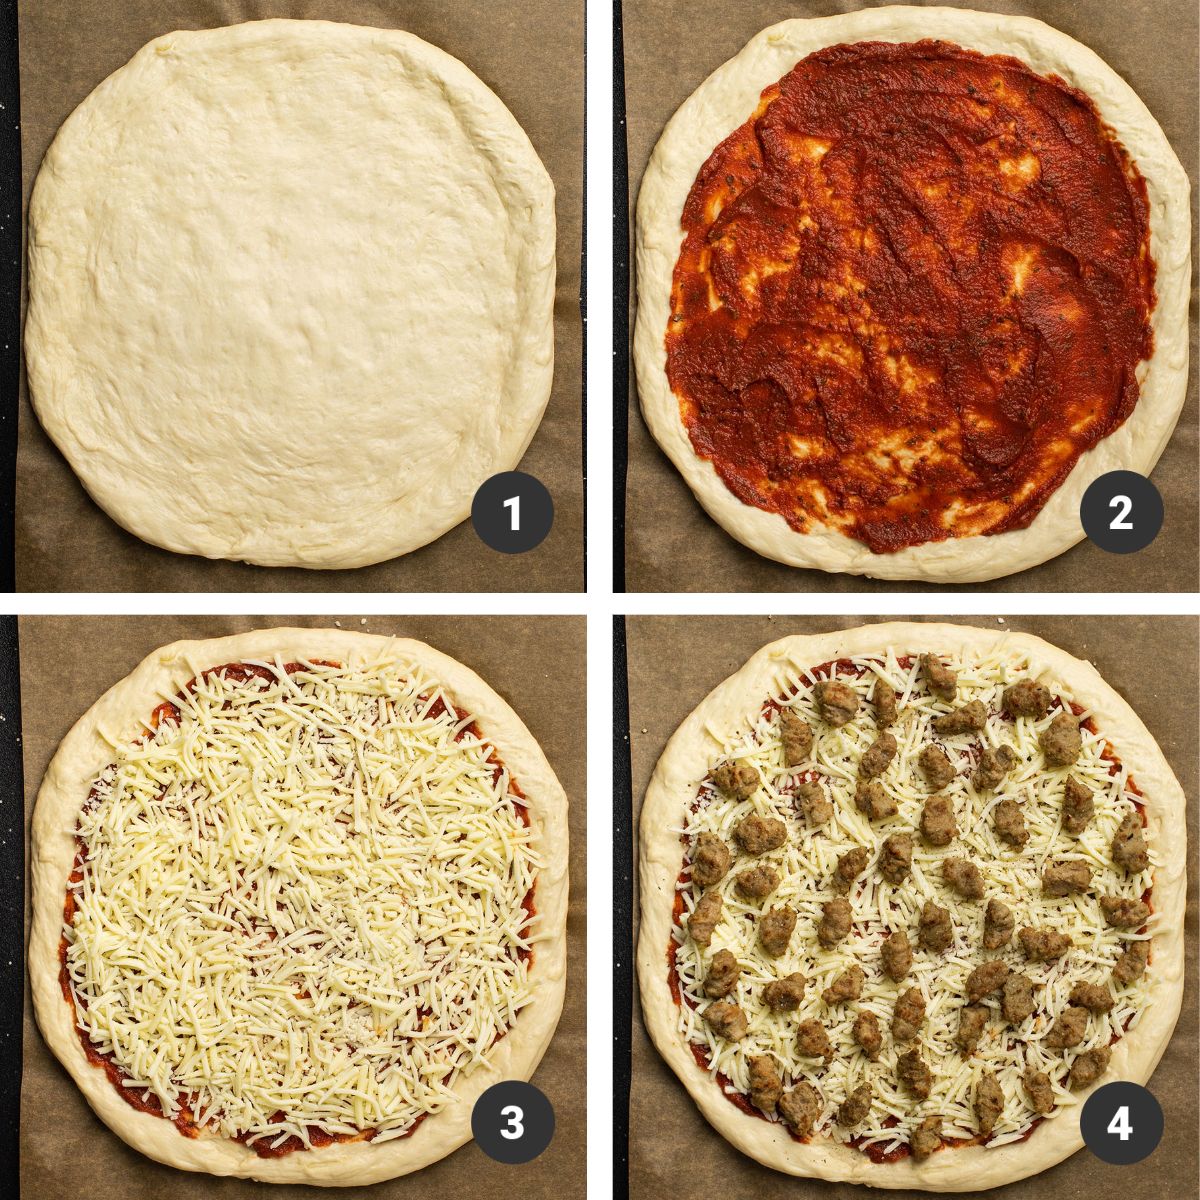 Adding pizza sauce, cheese, and sausage to pizza dough.